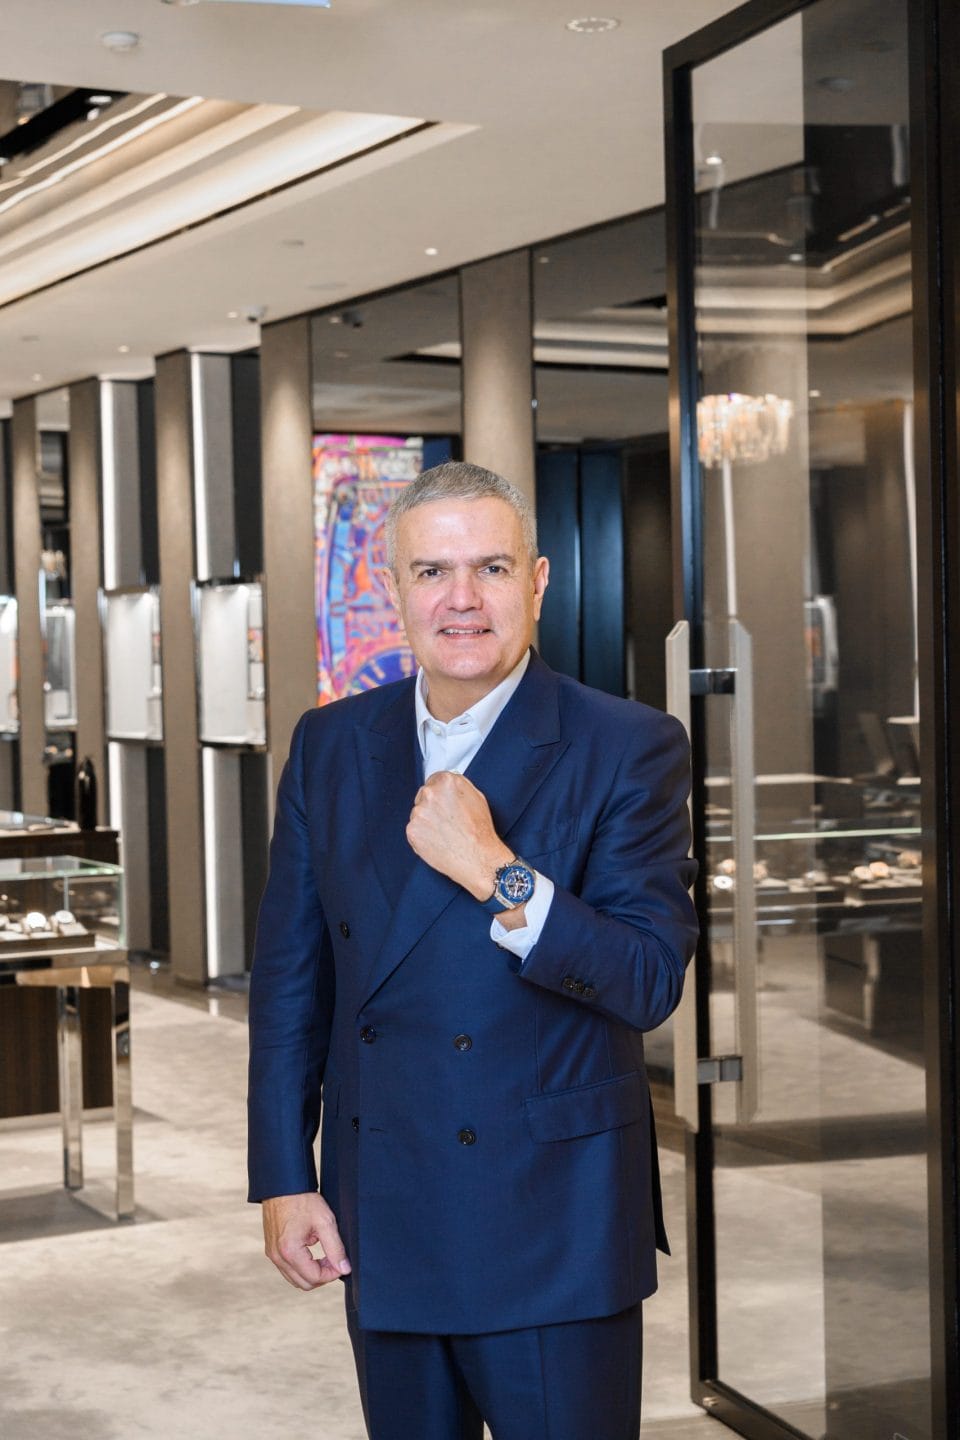 Ricardo Guadalupe, CEO of Hublot, On the Art Of Fusion